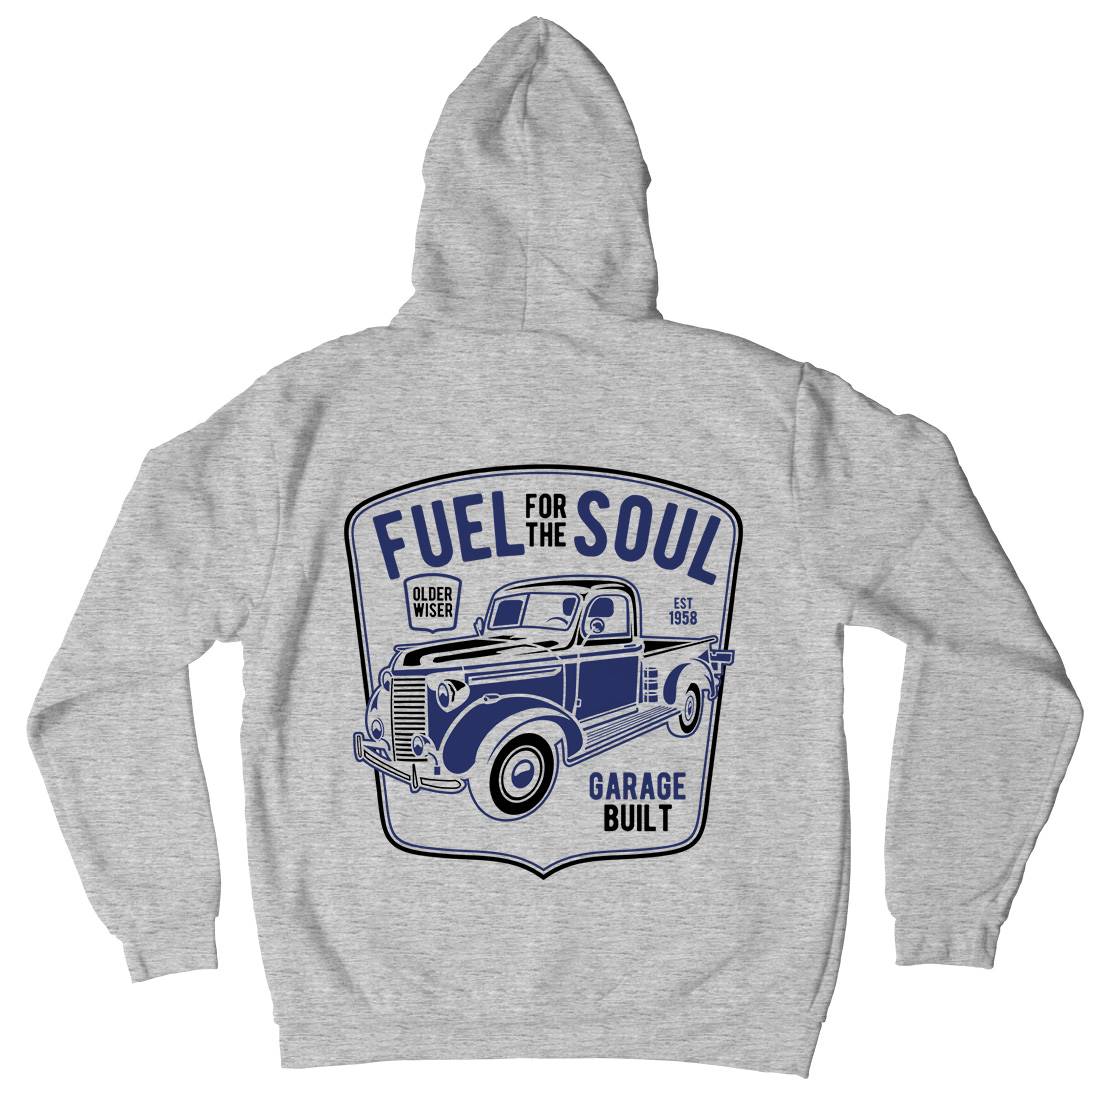 Fuel For The Soul Kids Crew Neck Hoodie Cars B213